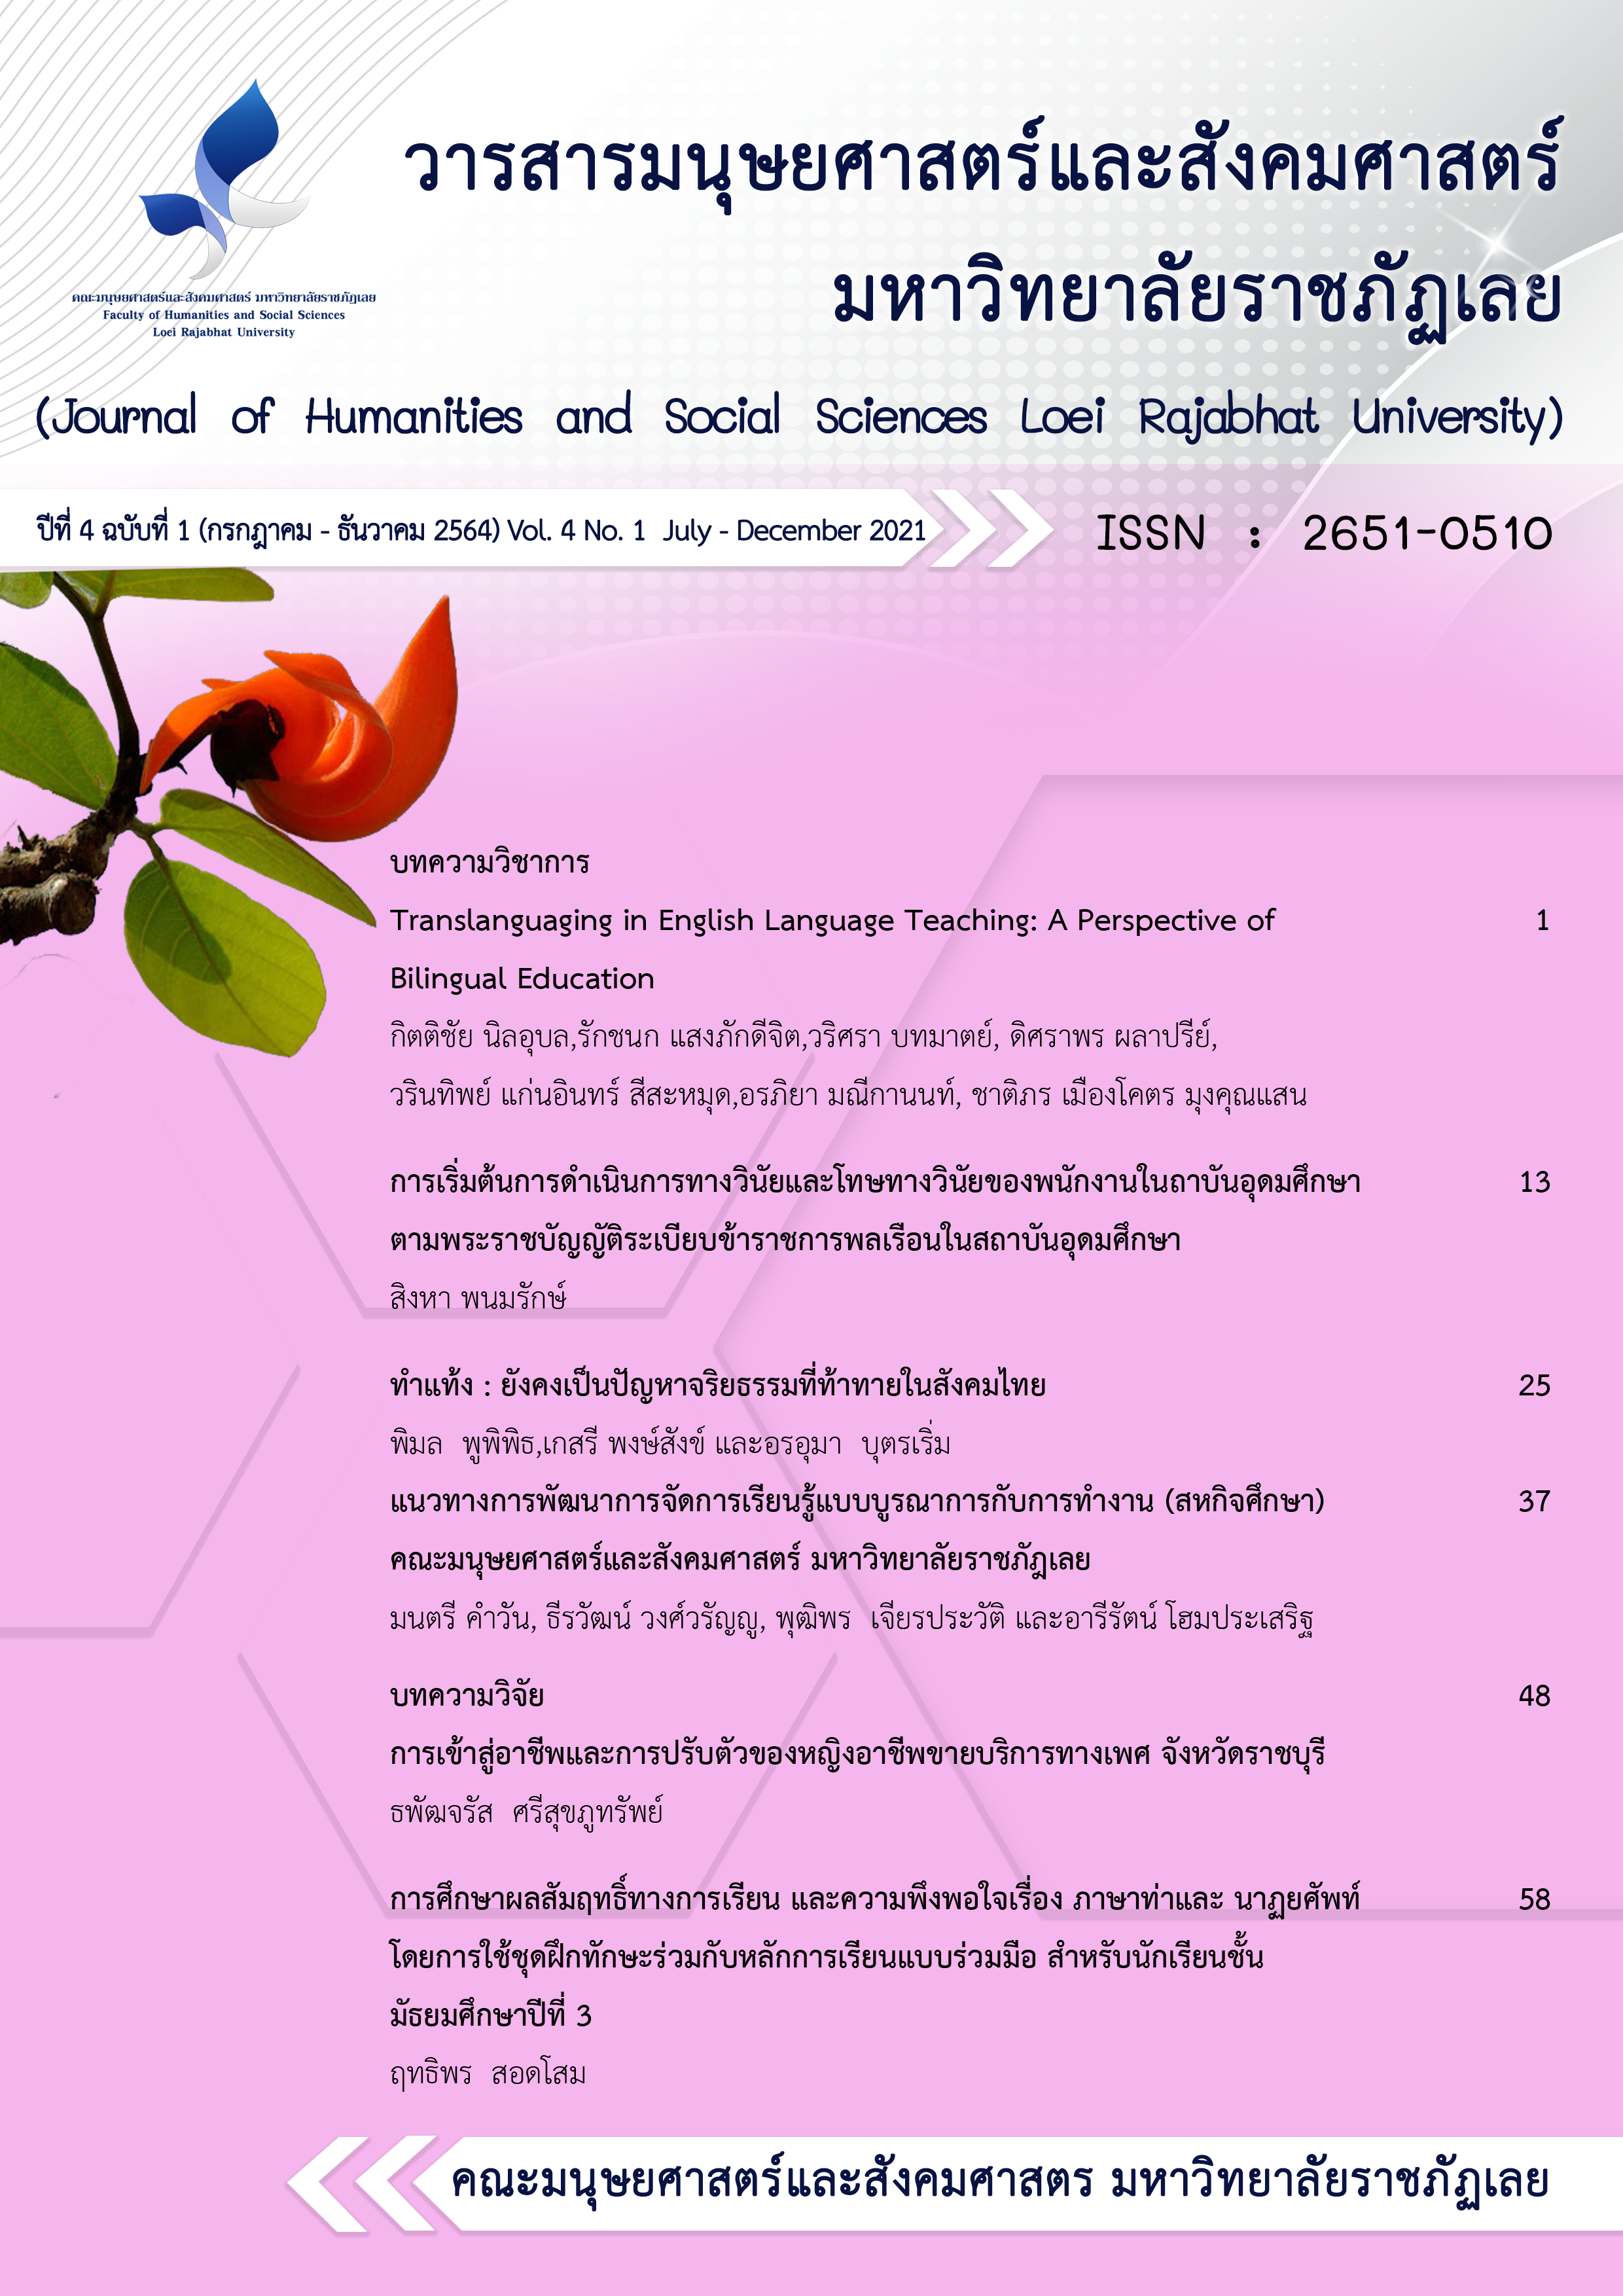 					View Vol. 4 No. 1 (2564): Journal of Humanities and Social Sciences Loei Rajabhat University Vol. 4 No. 1 July - December 2021
				